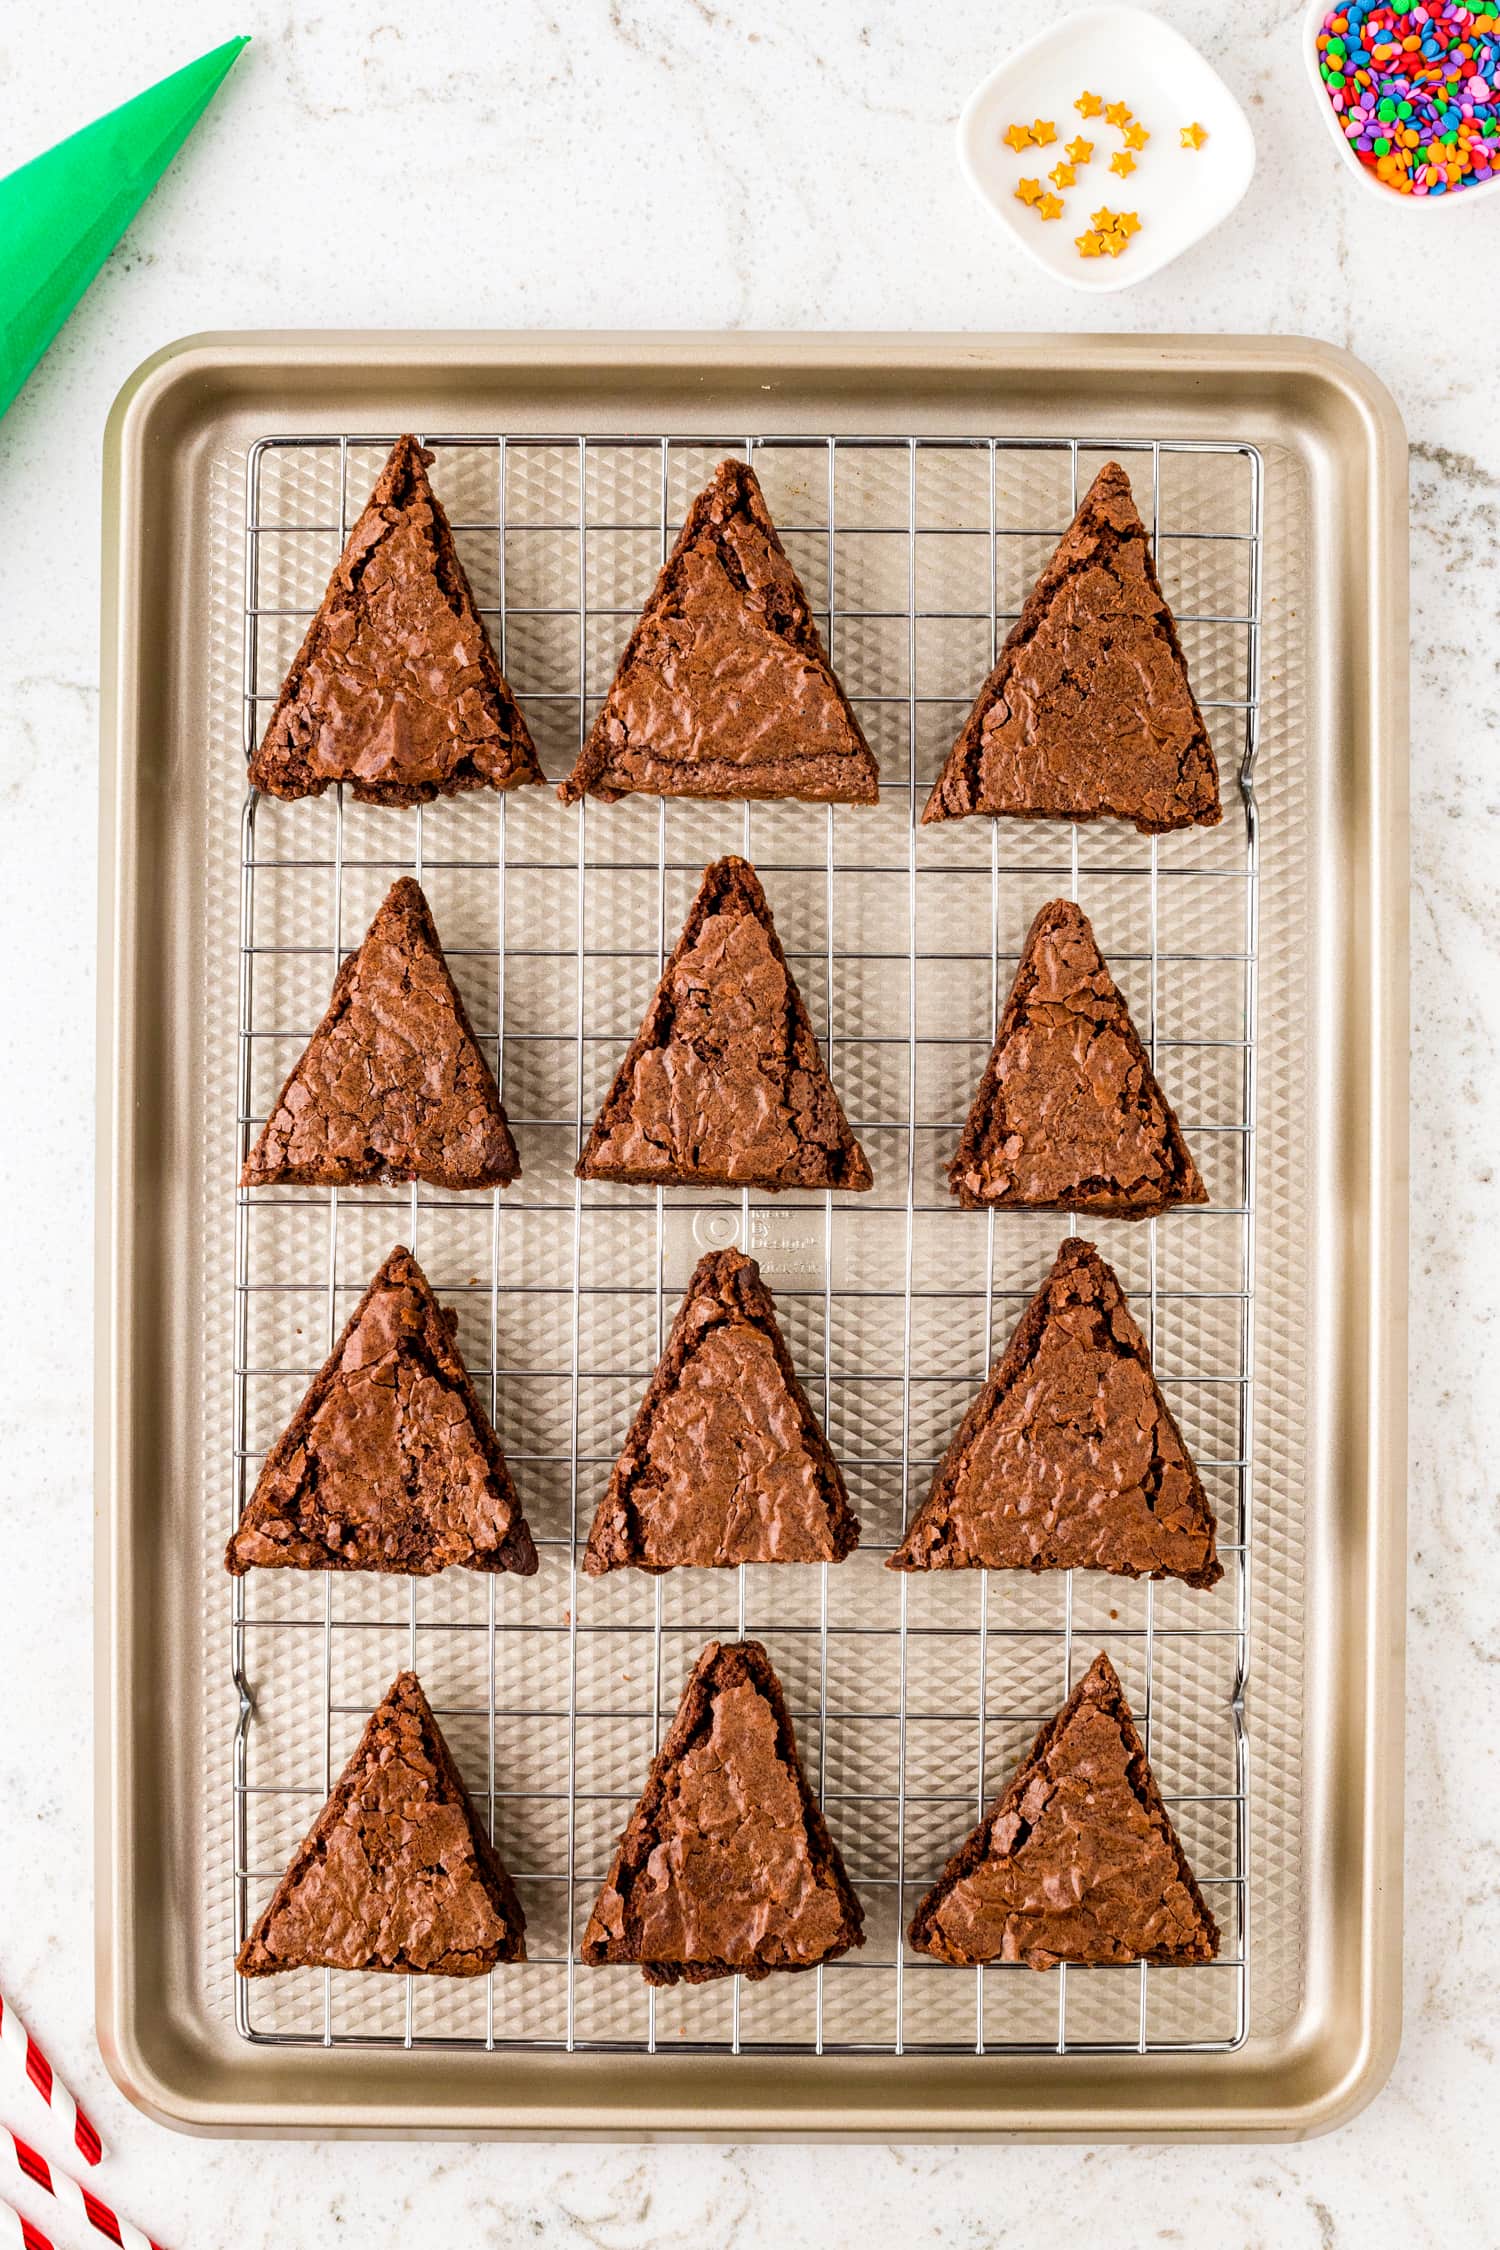 Brownies cut into triangles